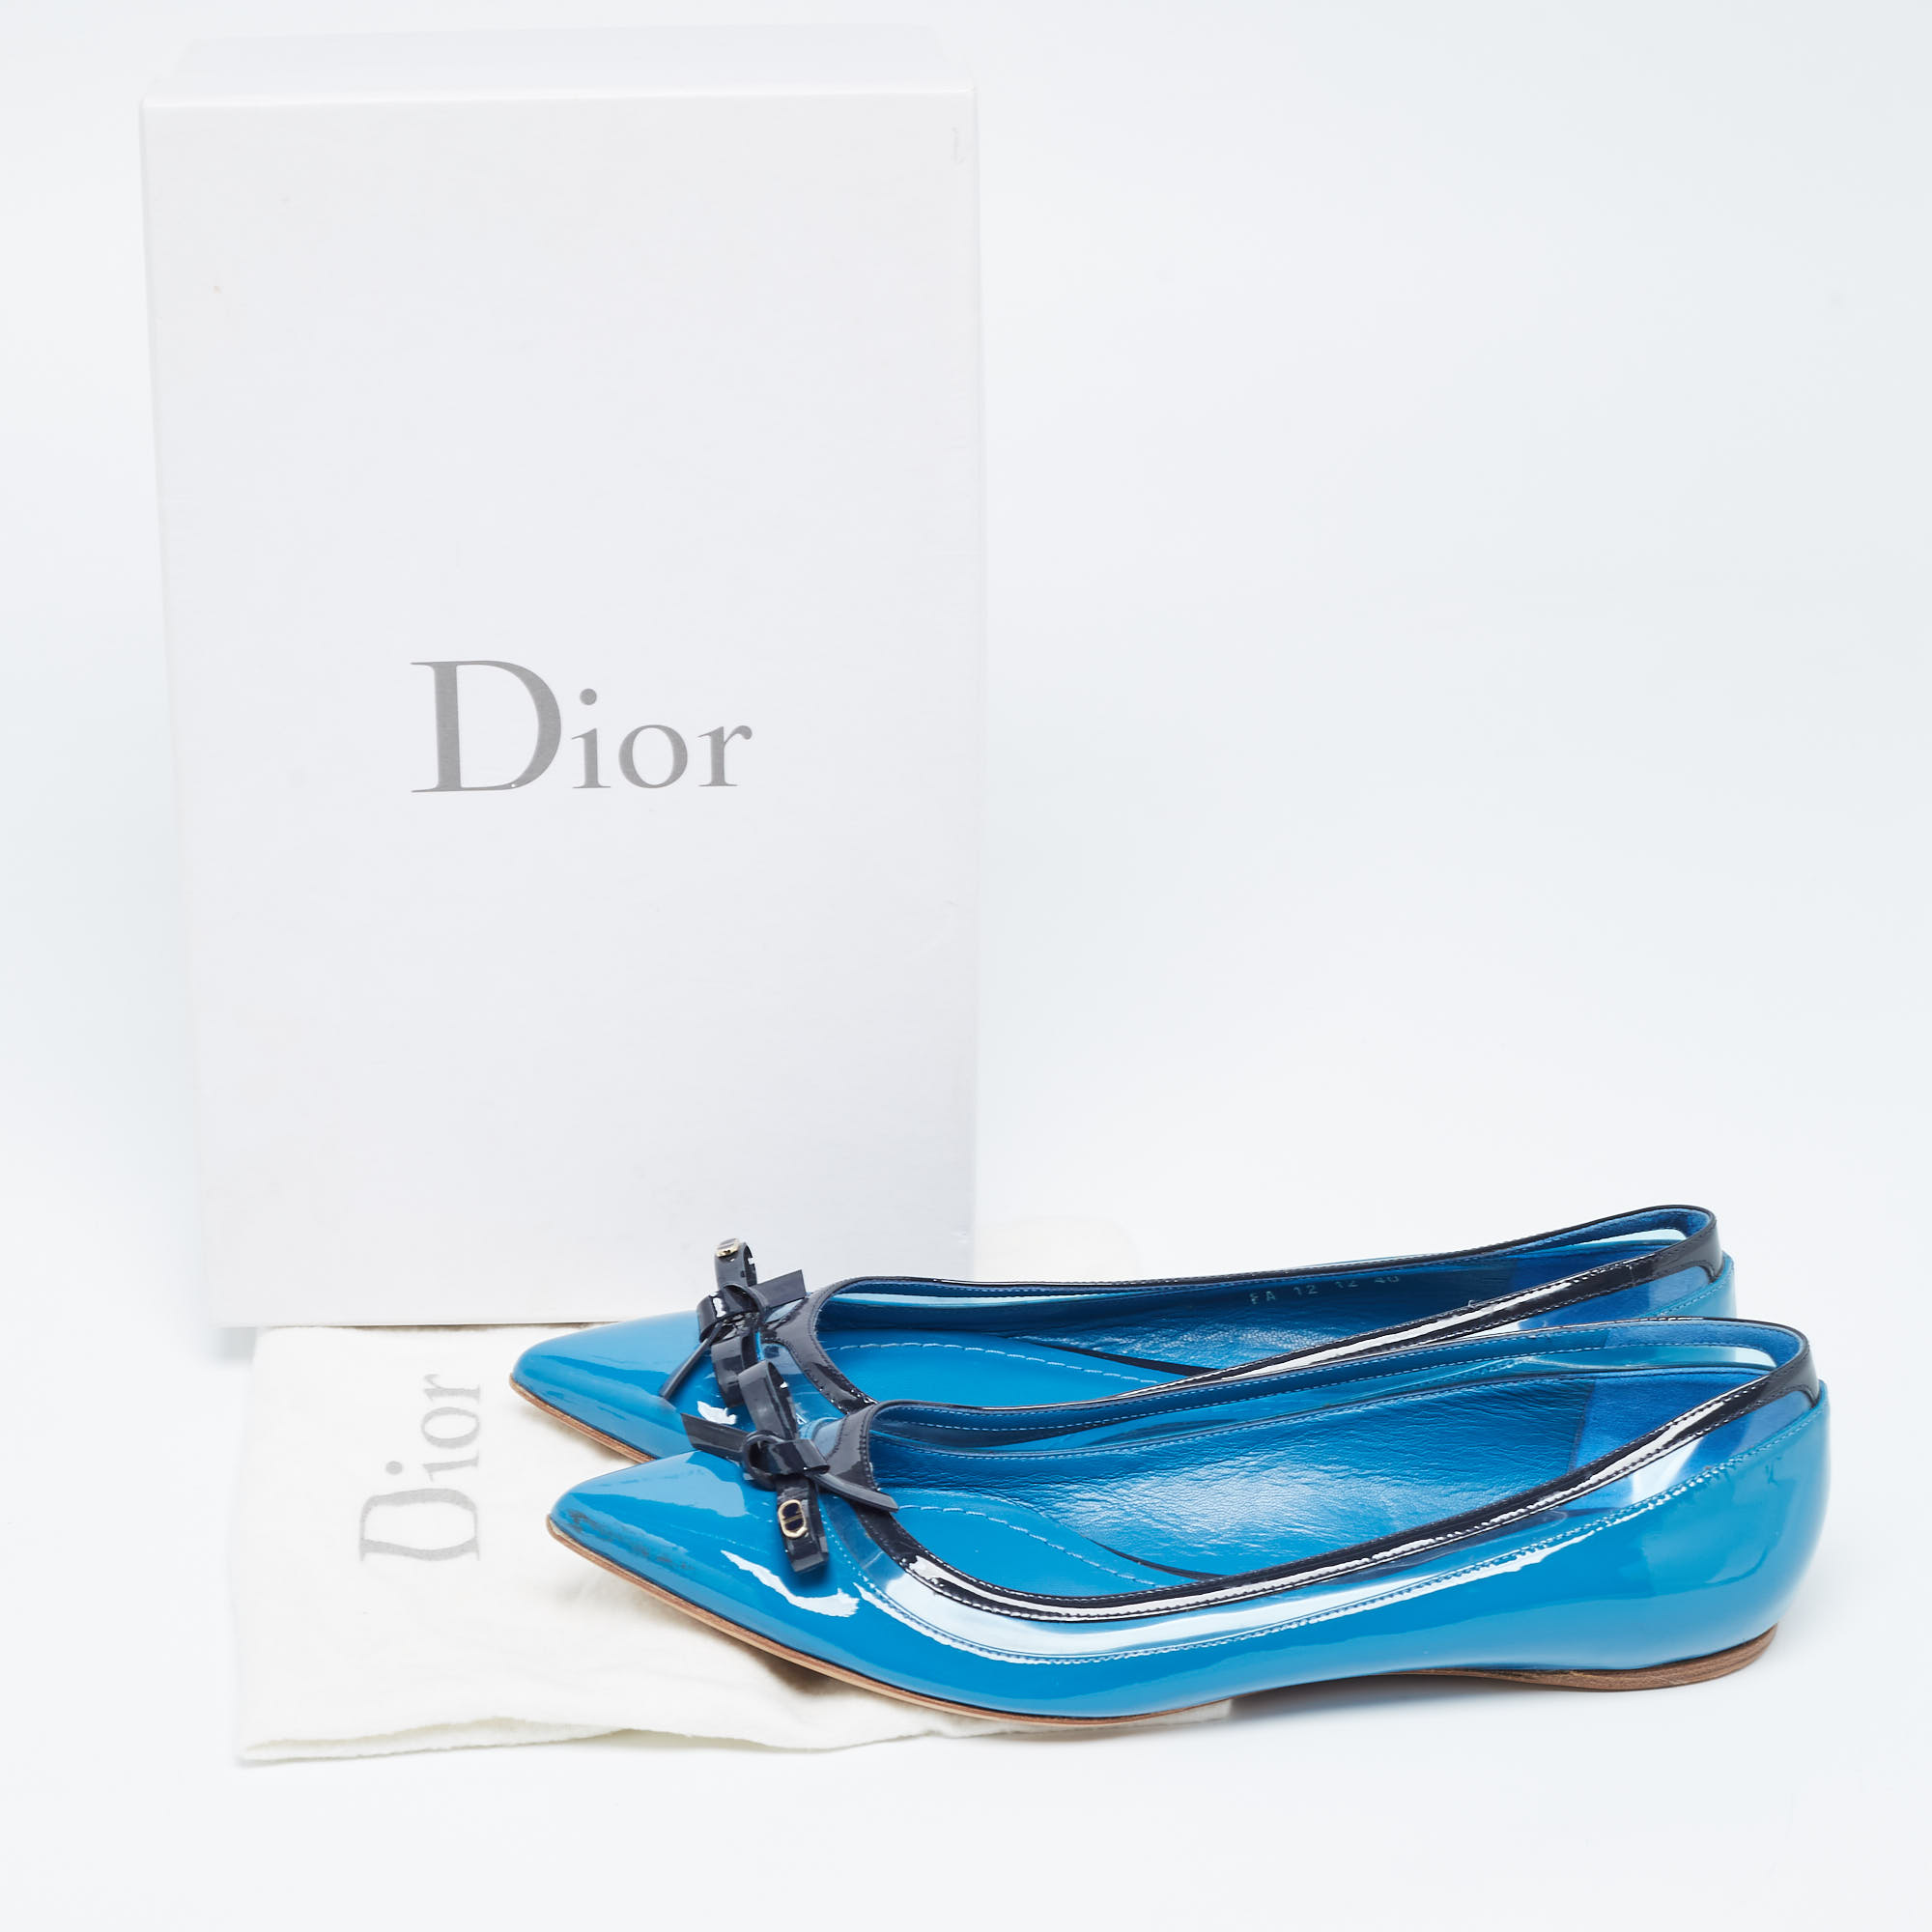 Dior Two Tone Patent Leather Bow Ballet Flats Size 40